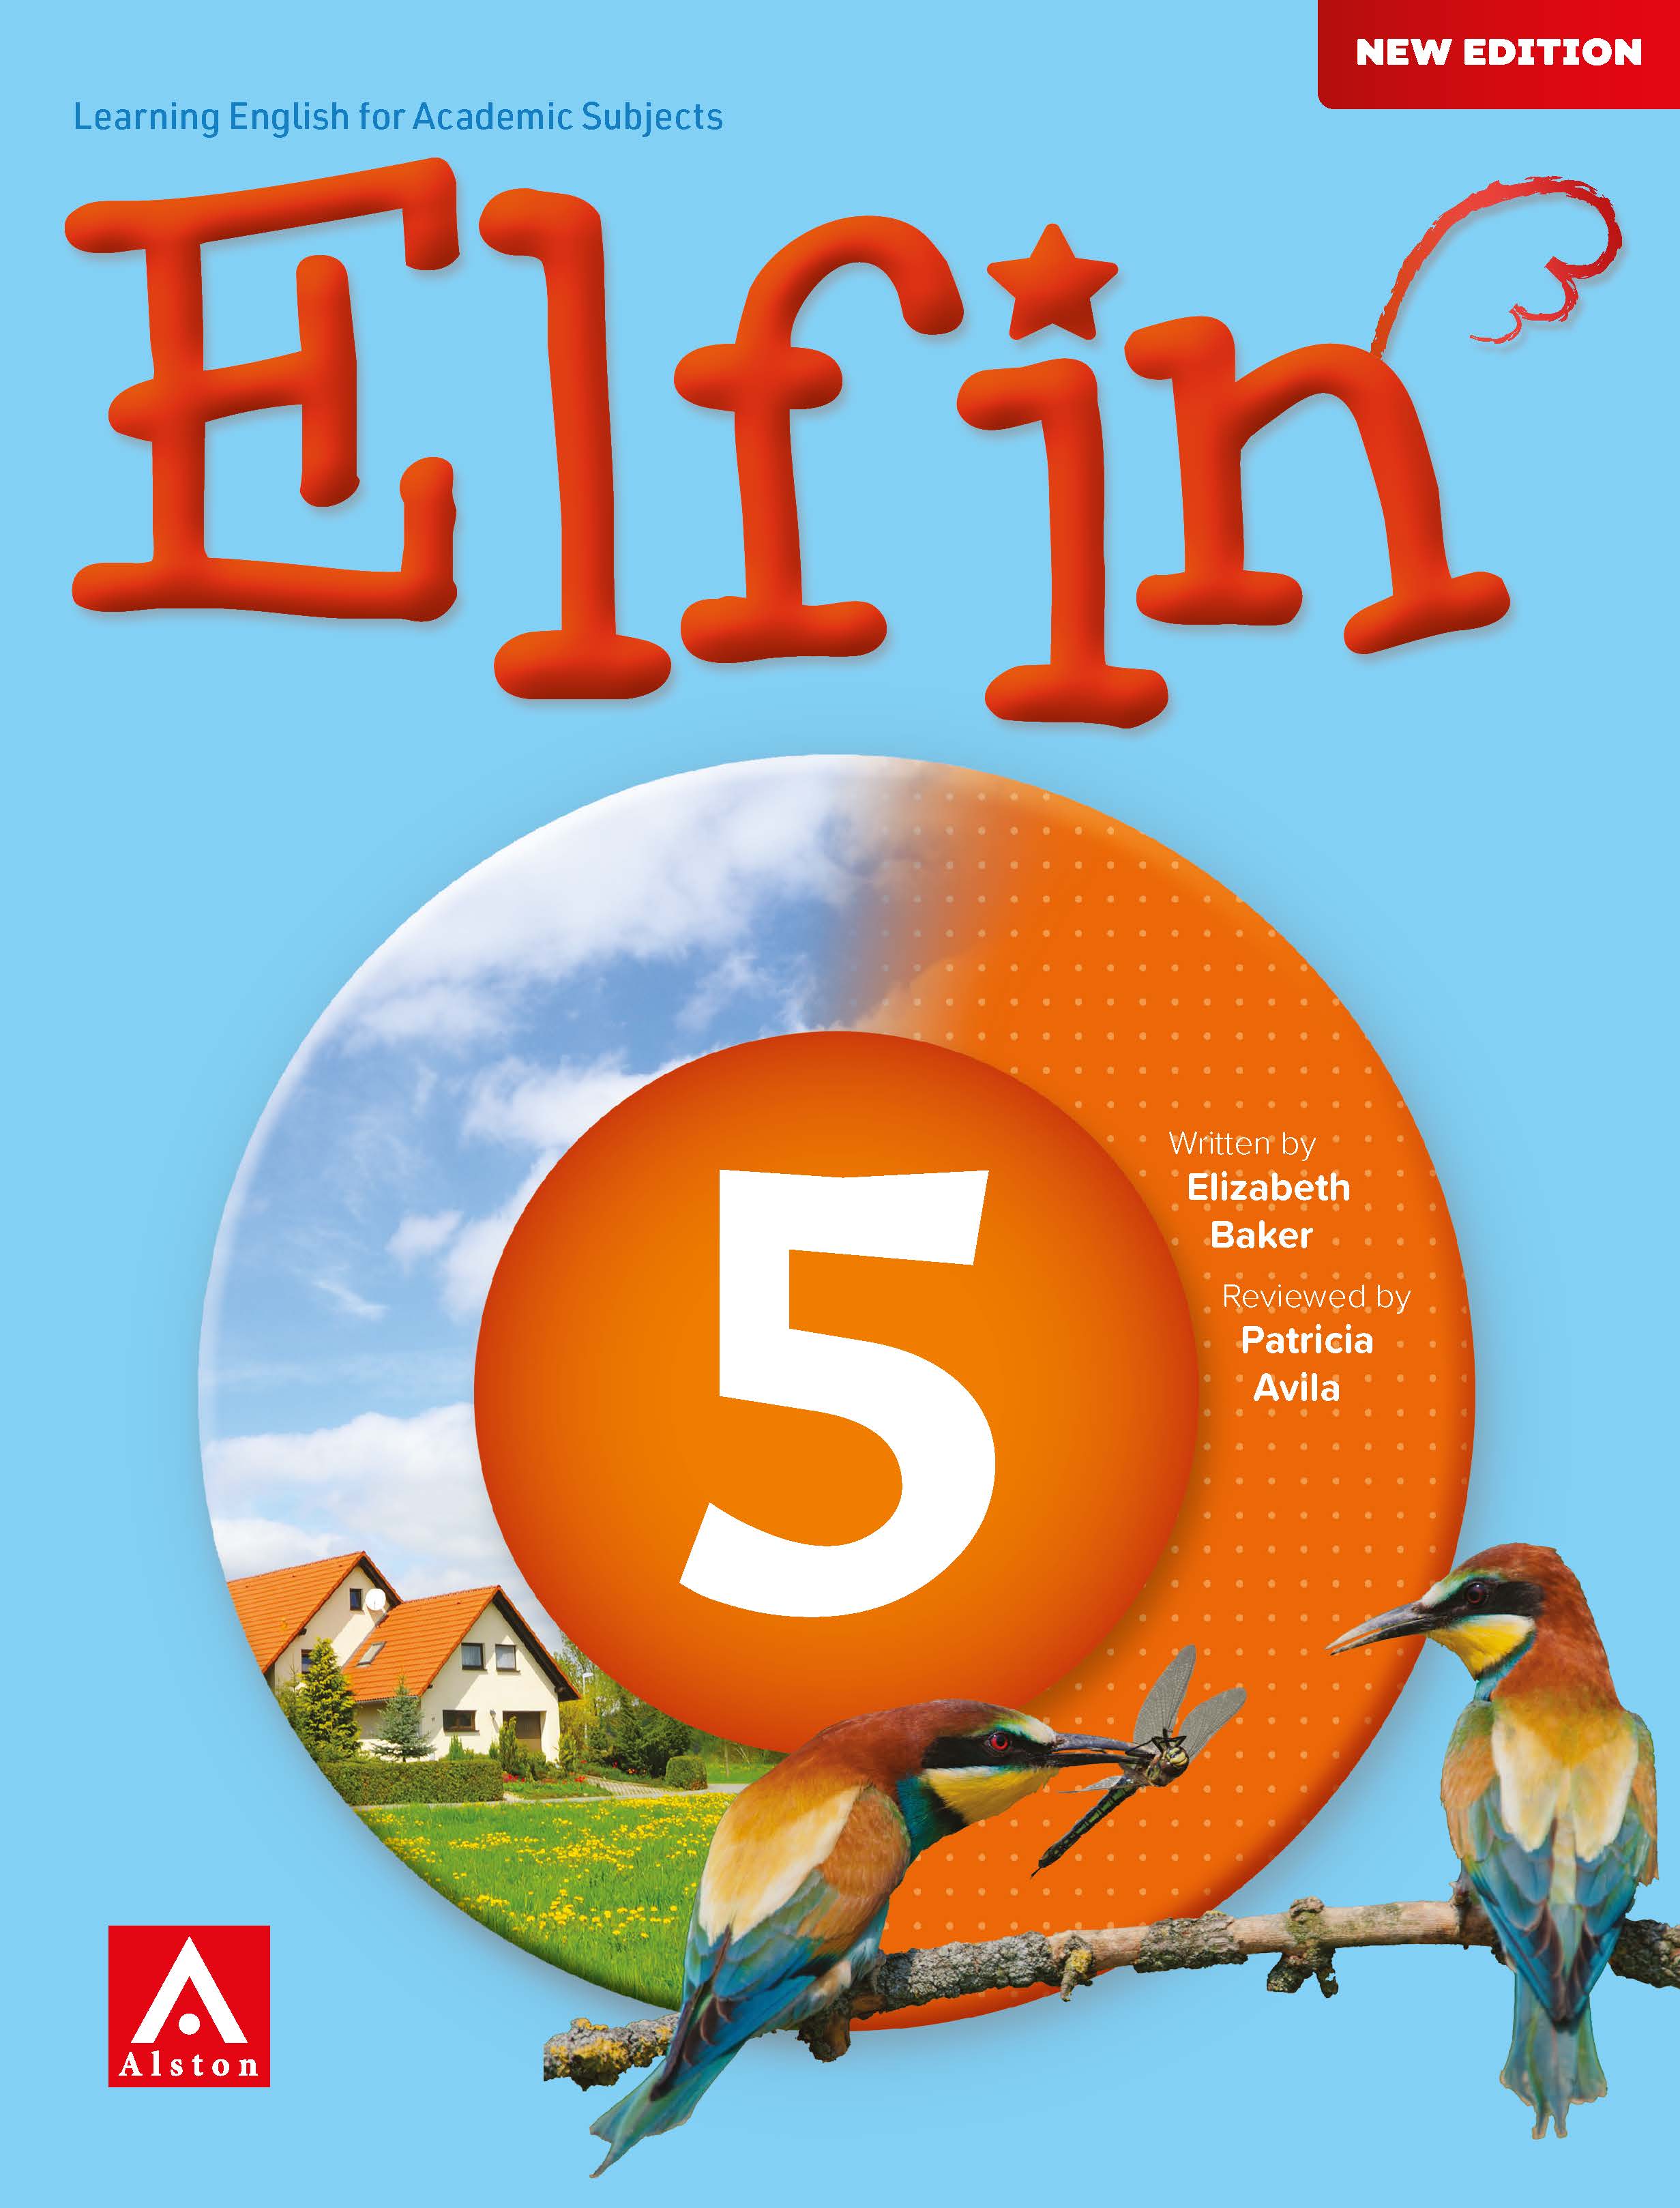 Elfin New Edition Cover SB TG 1 6 Page 05